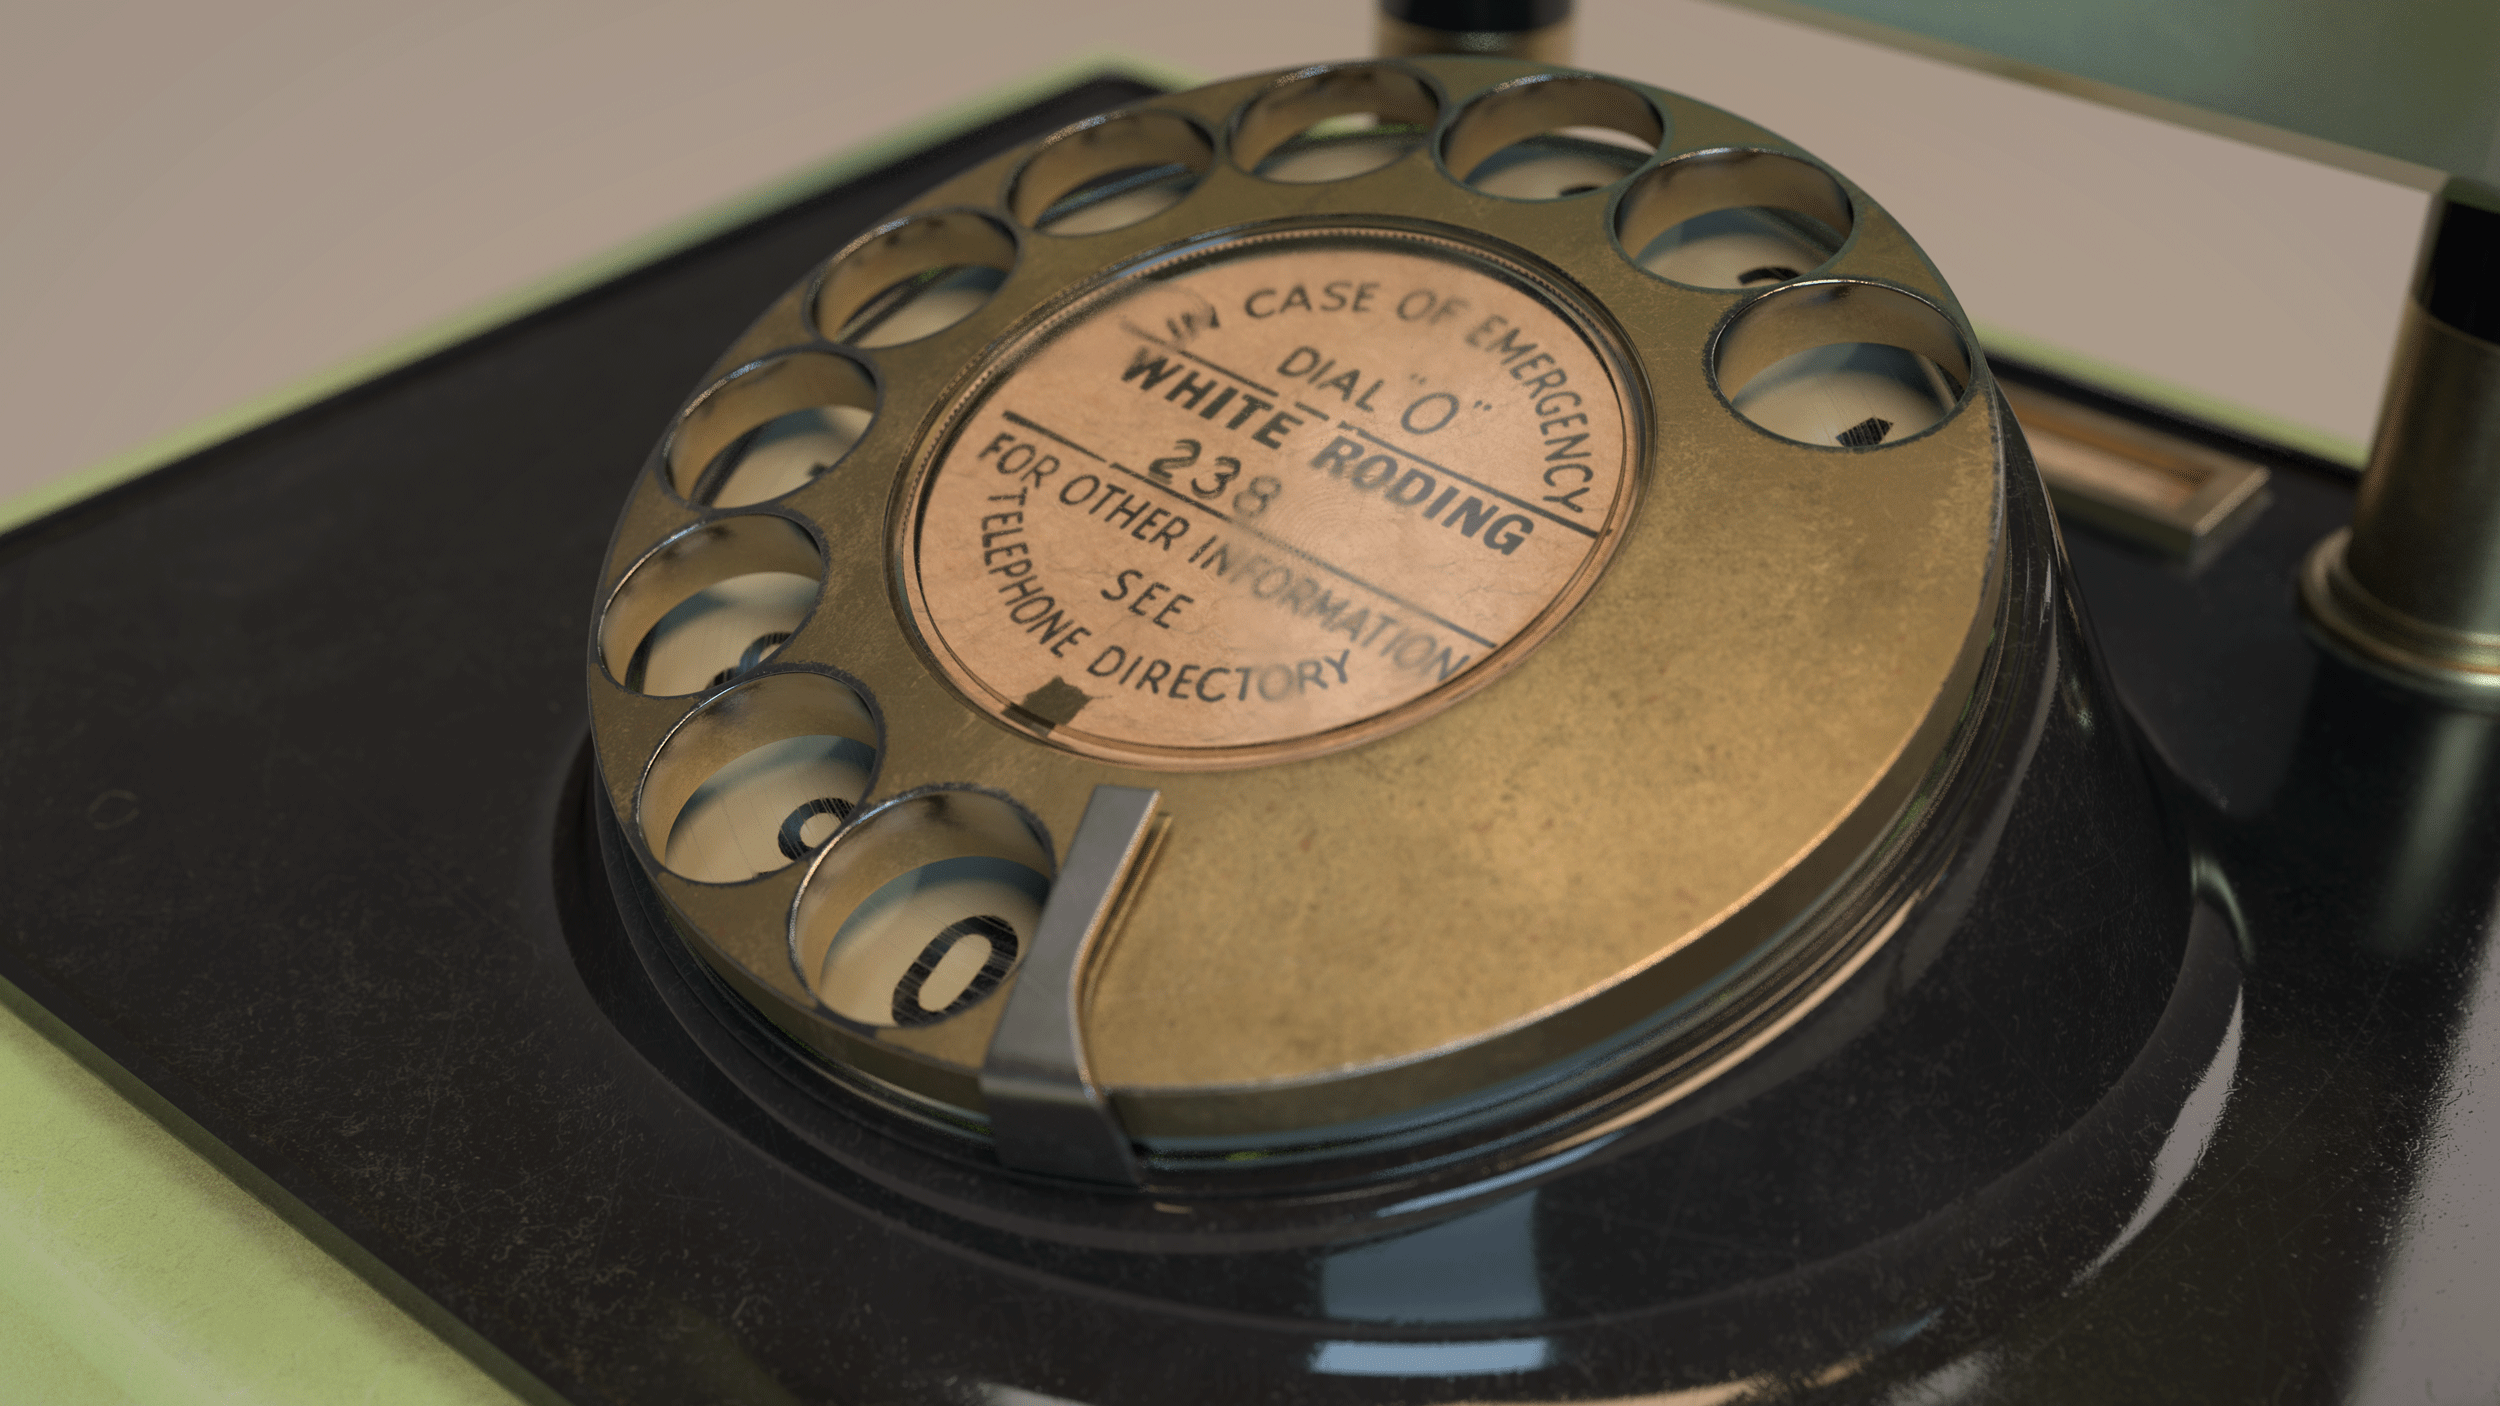 BA VFX work by Cameron Eddie showing a high-fidelity still of the number dial of the phone.